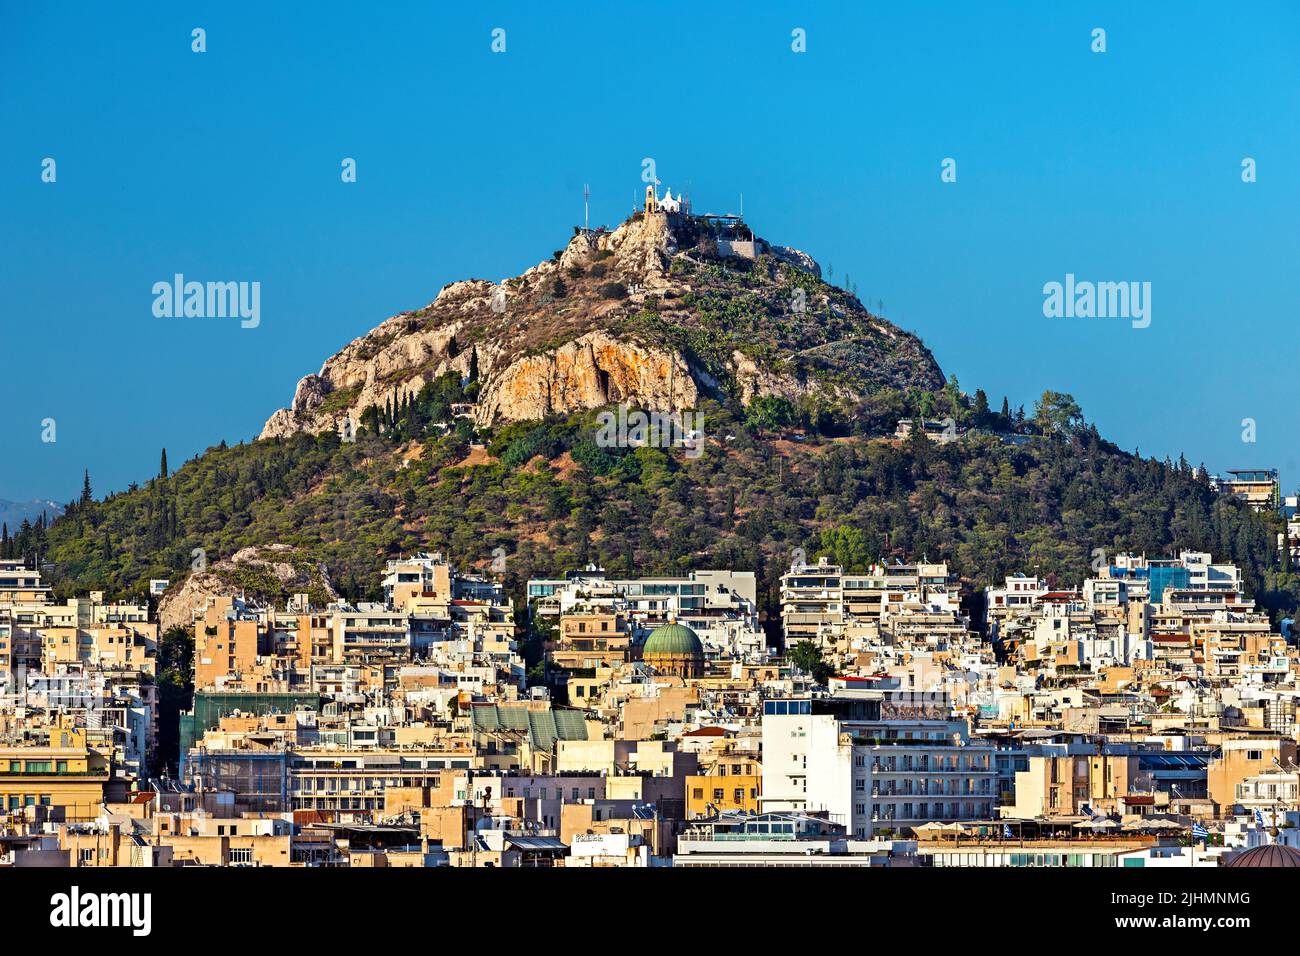 Lycabettus hill, the highest hill of Athens (Greece and its best viewpoint, with the church of Saint George on top. Stock Photo